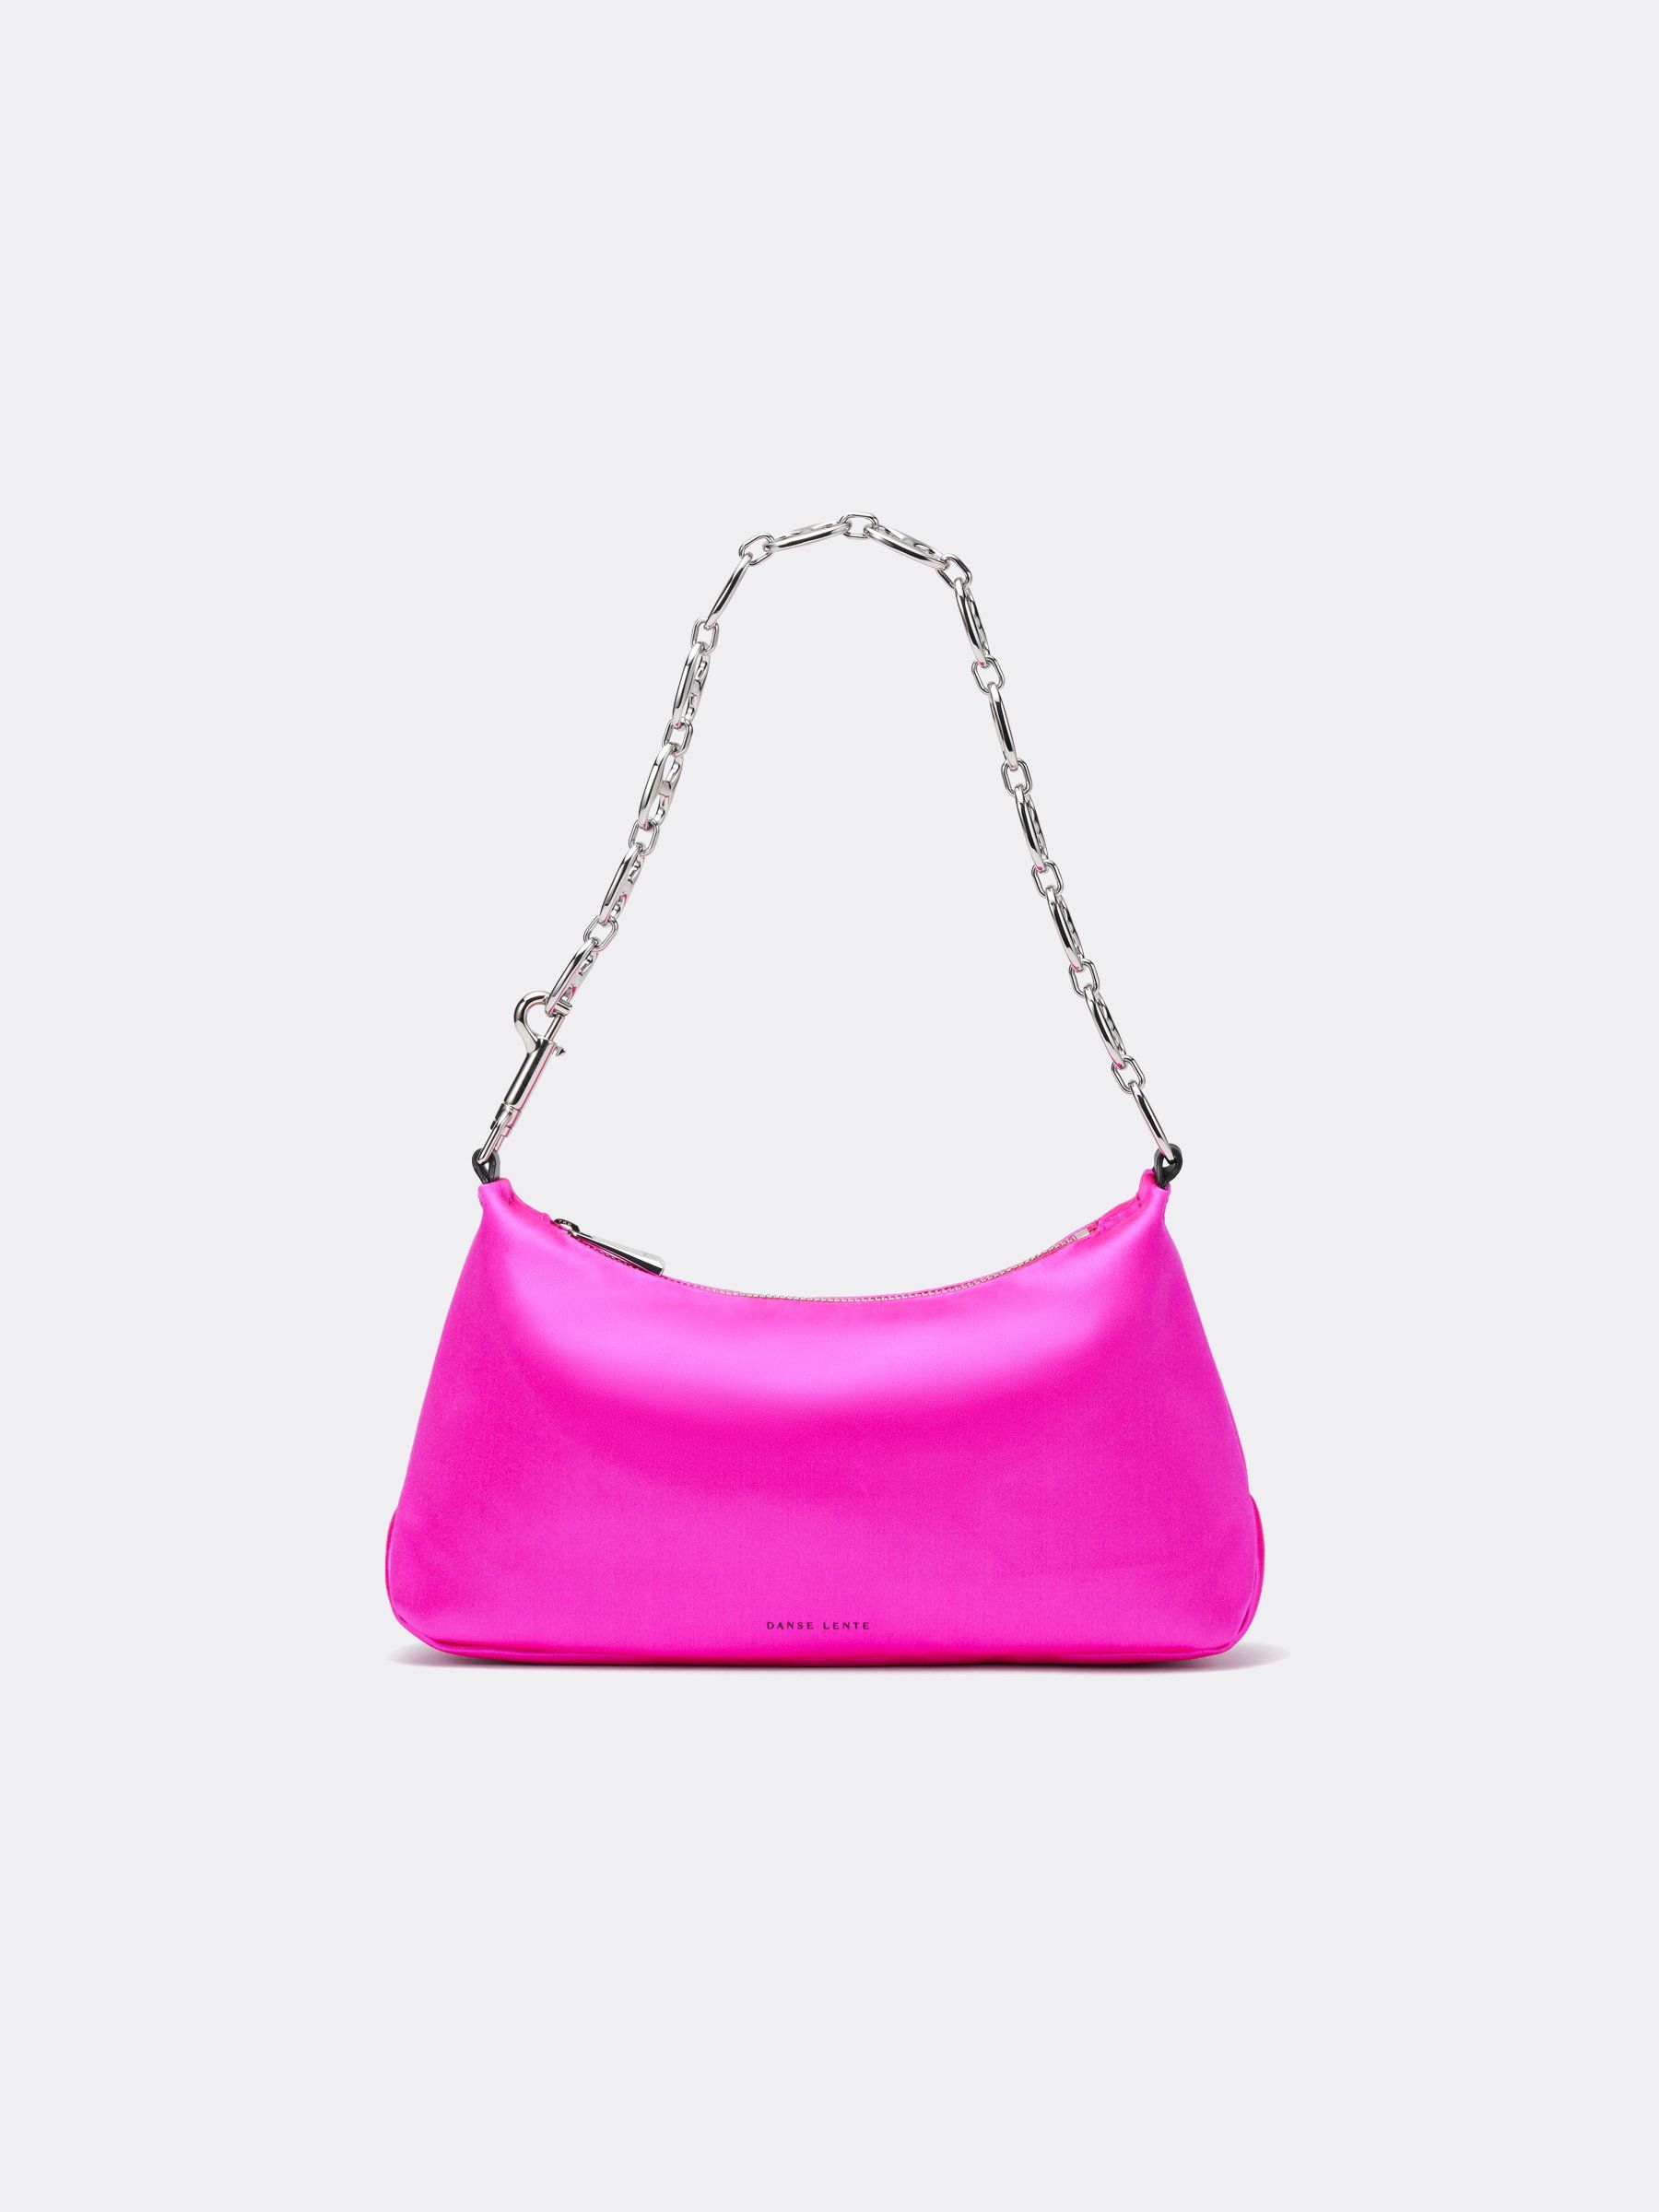 36 Colorful Purses That Are a Total Vibe | Who What Wear